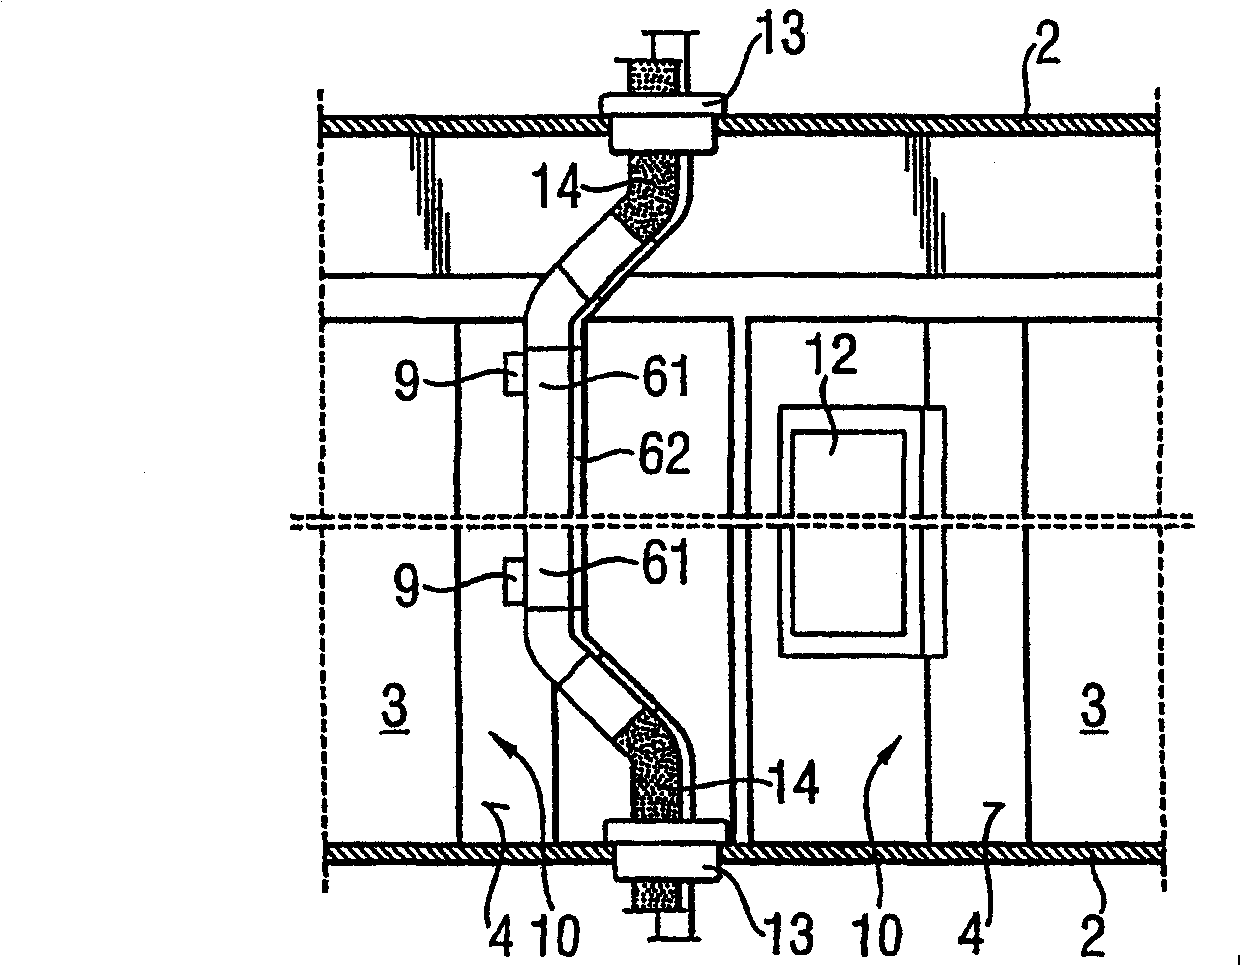 Floating structure and method for producing said floating structure comprising prefabricated room units and a method of forming prefabricated room units and said prefabricated room units